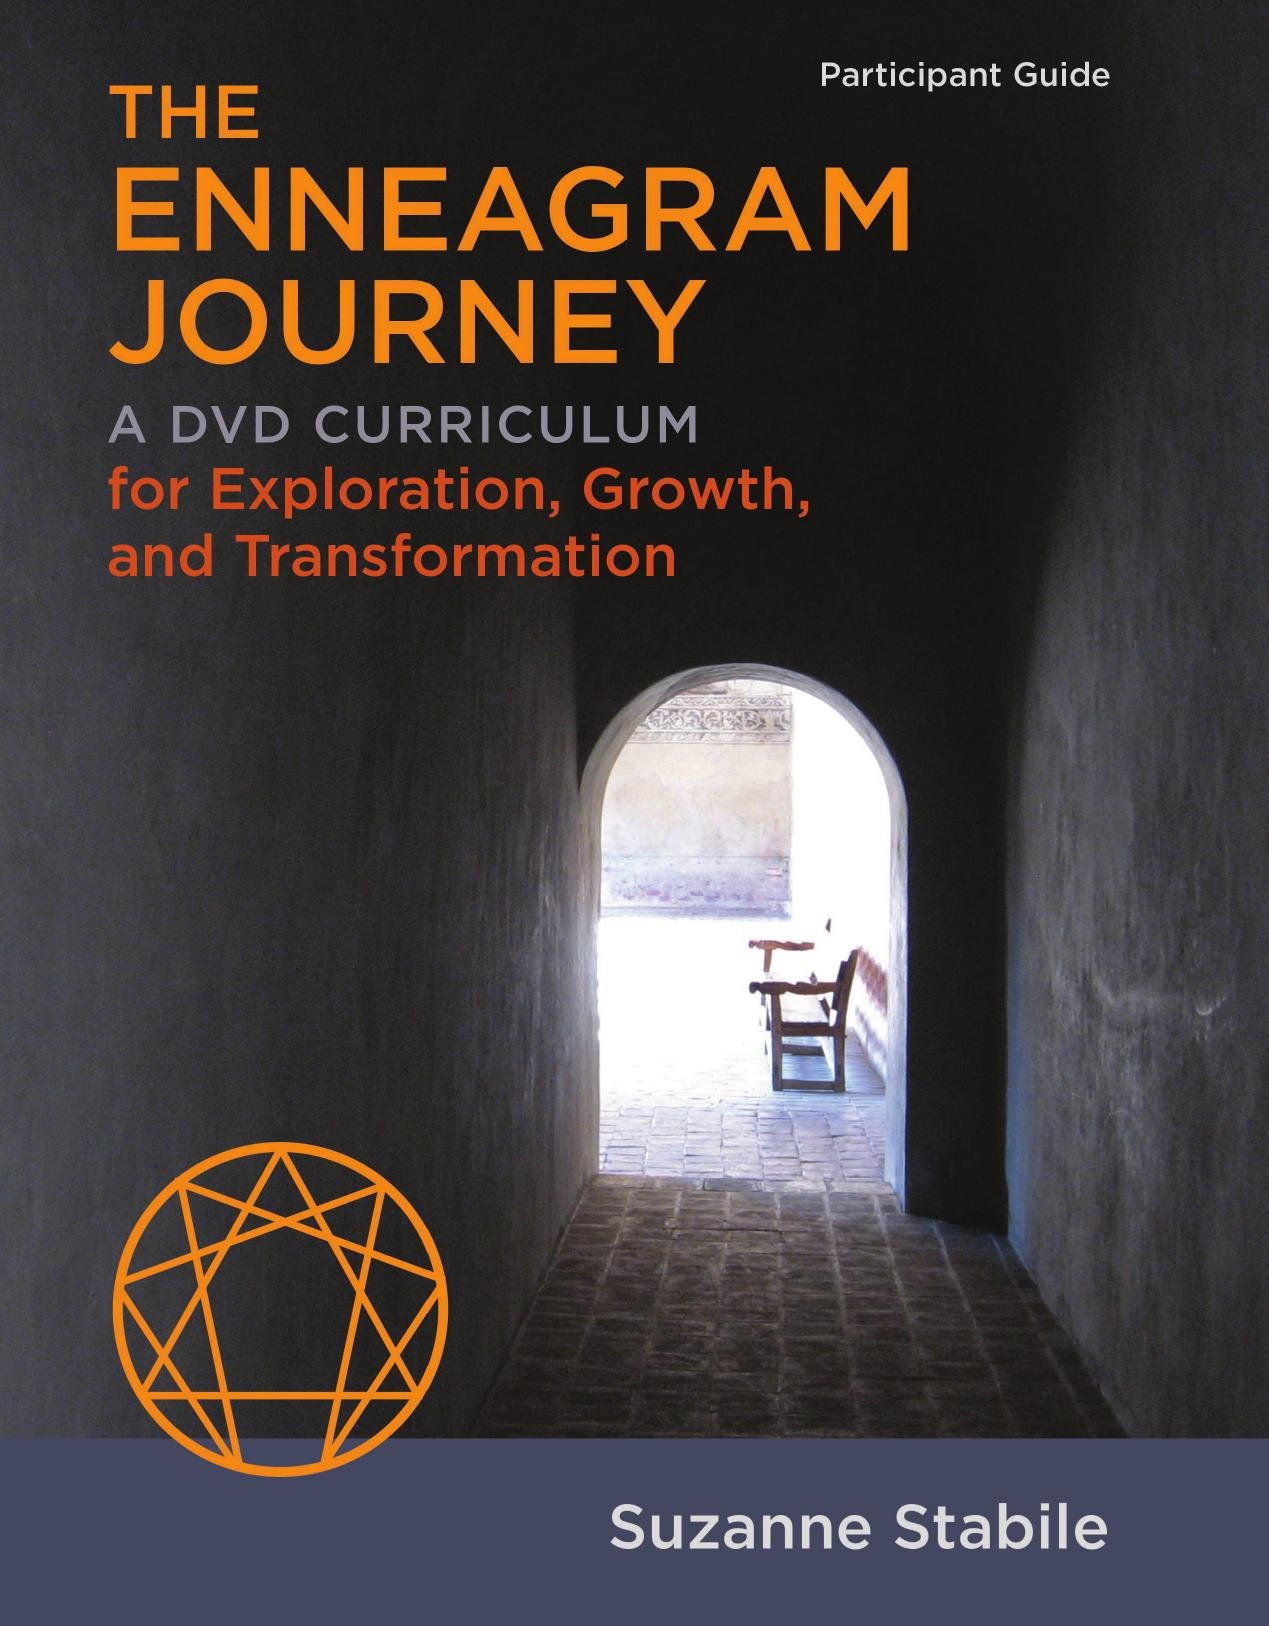 Enneagram Journey Curriculum Participant Guide, The - Suzanne Stabile.jpg